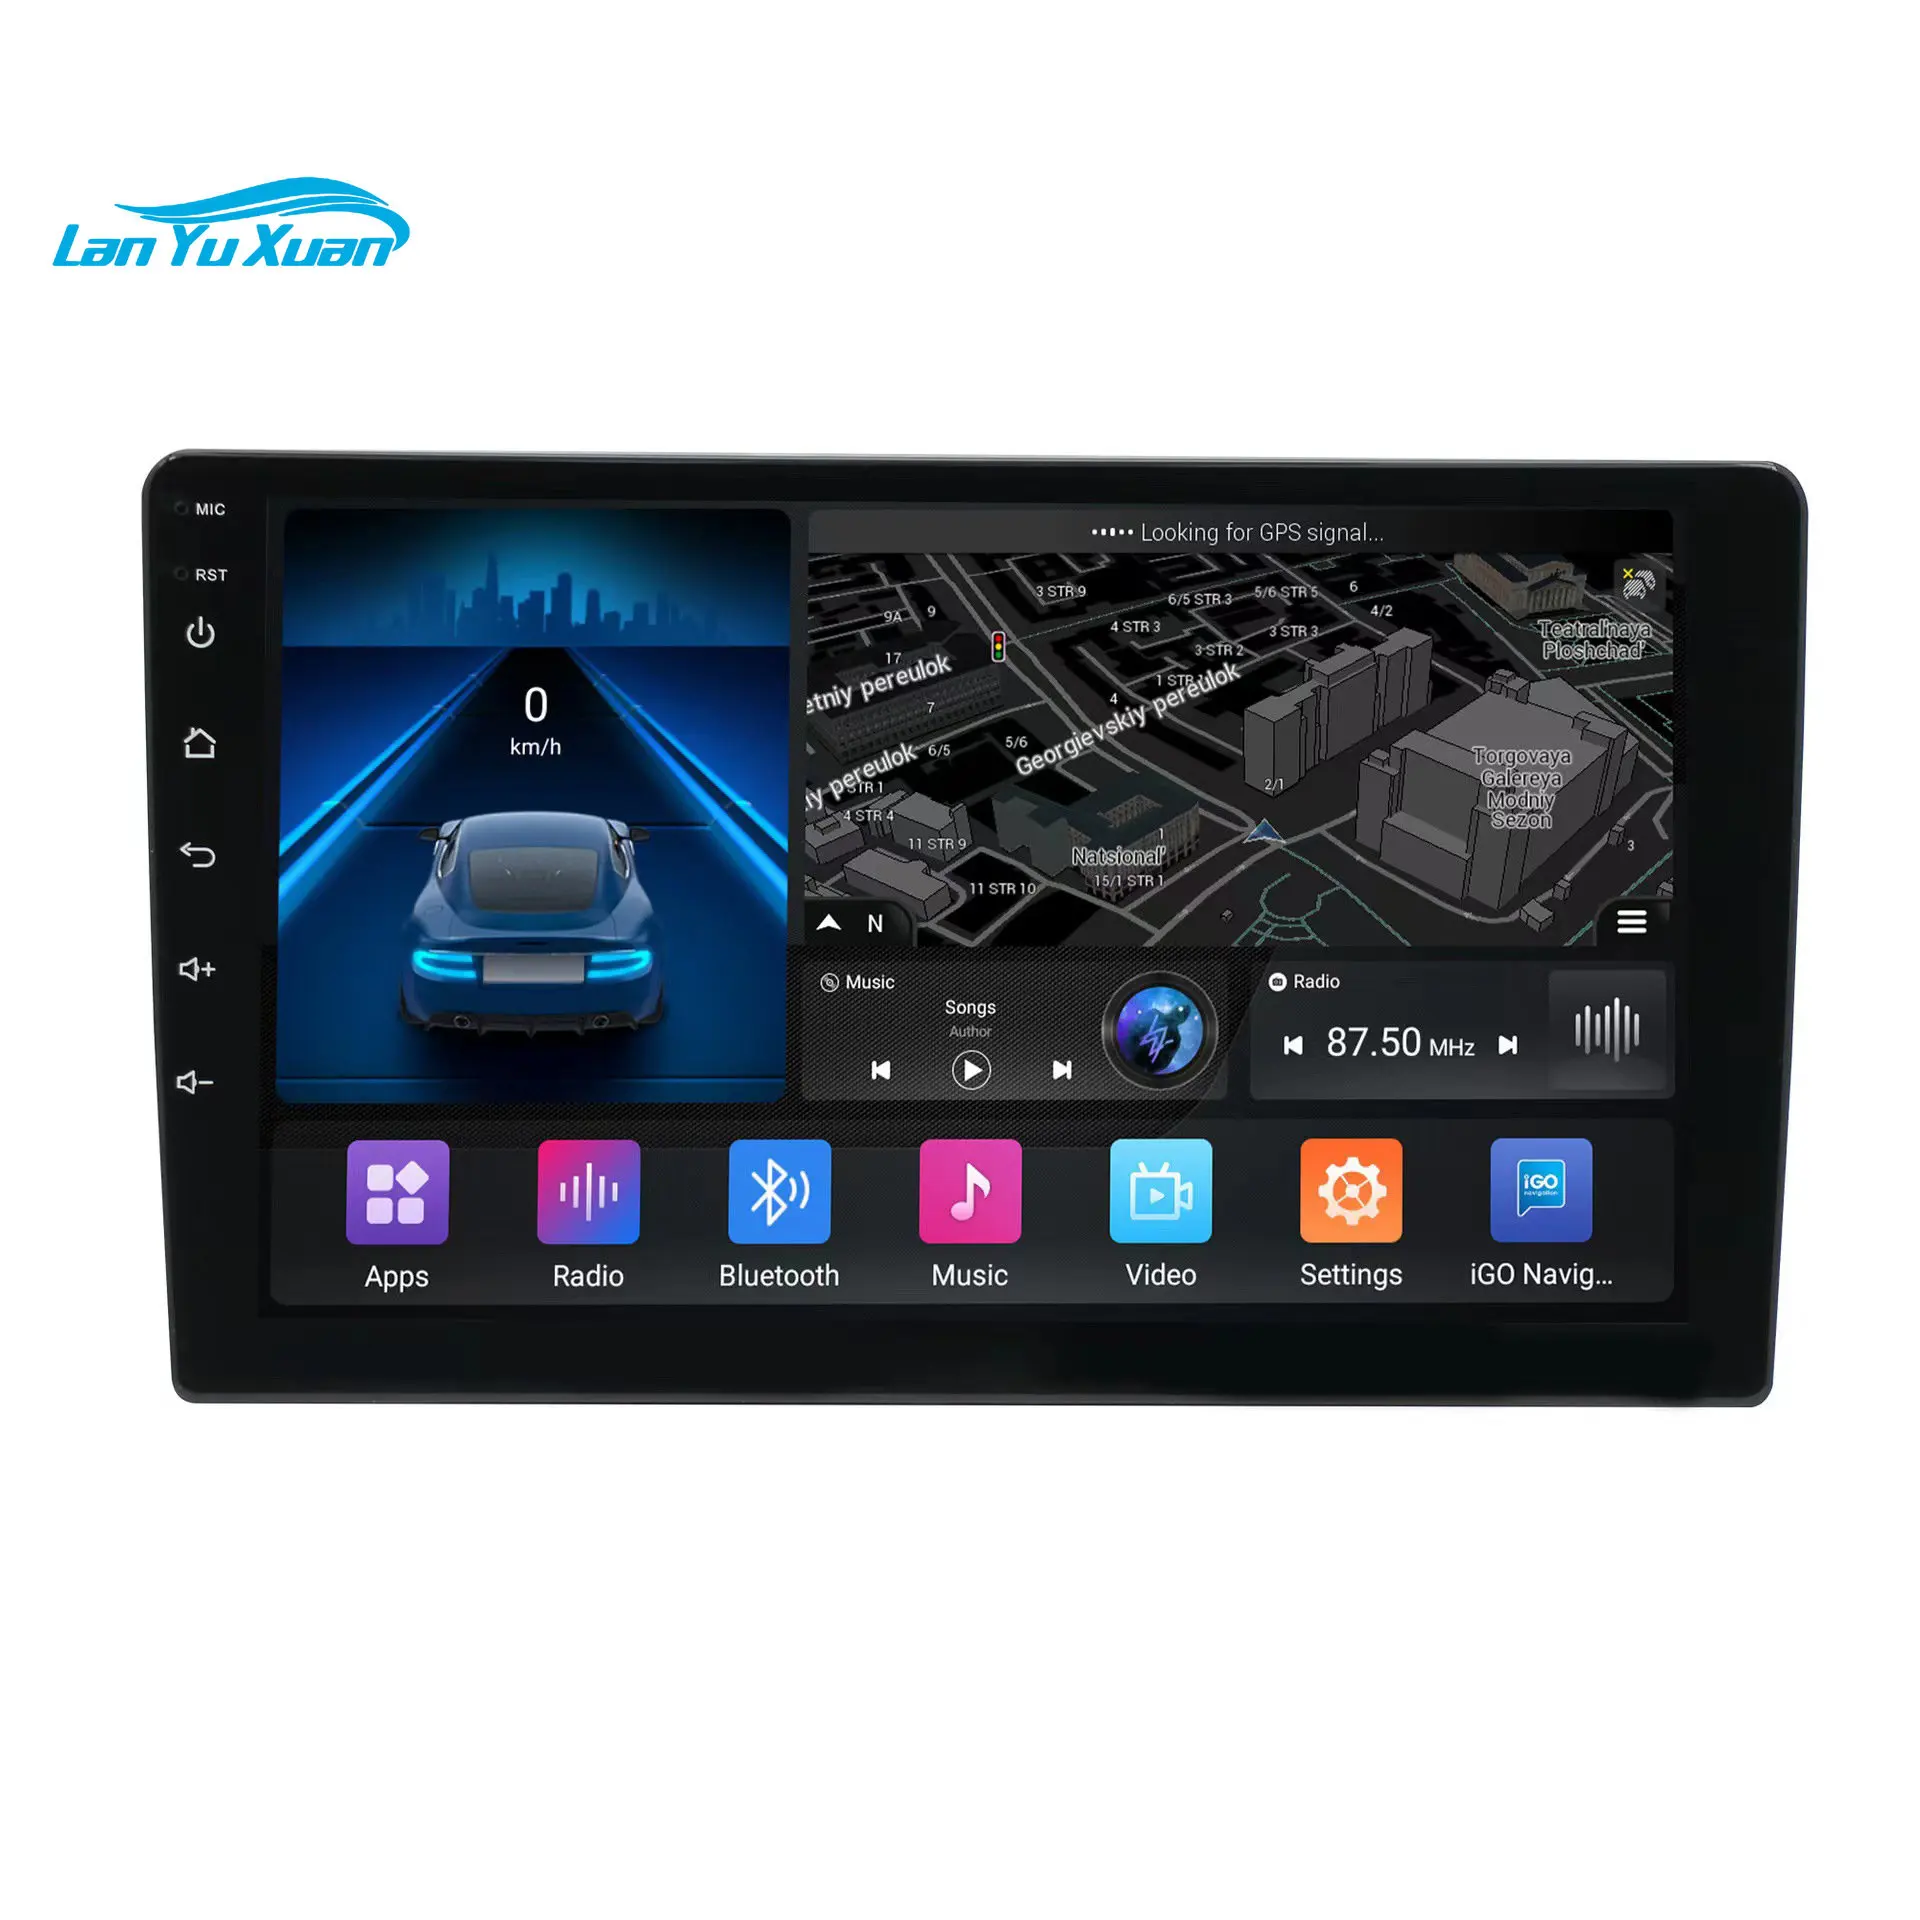 Touch Screen 9inch 10inch 12.3 inch 4G WIFI GPS Stereo Radio Navigation System o Auto mp5 player for car car universal 9 7 inch vertical touch ips screen car radio player car wifi fm gps navigation